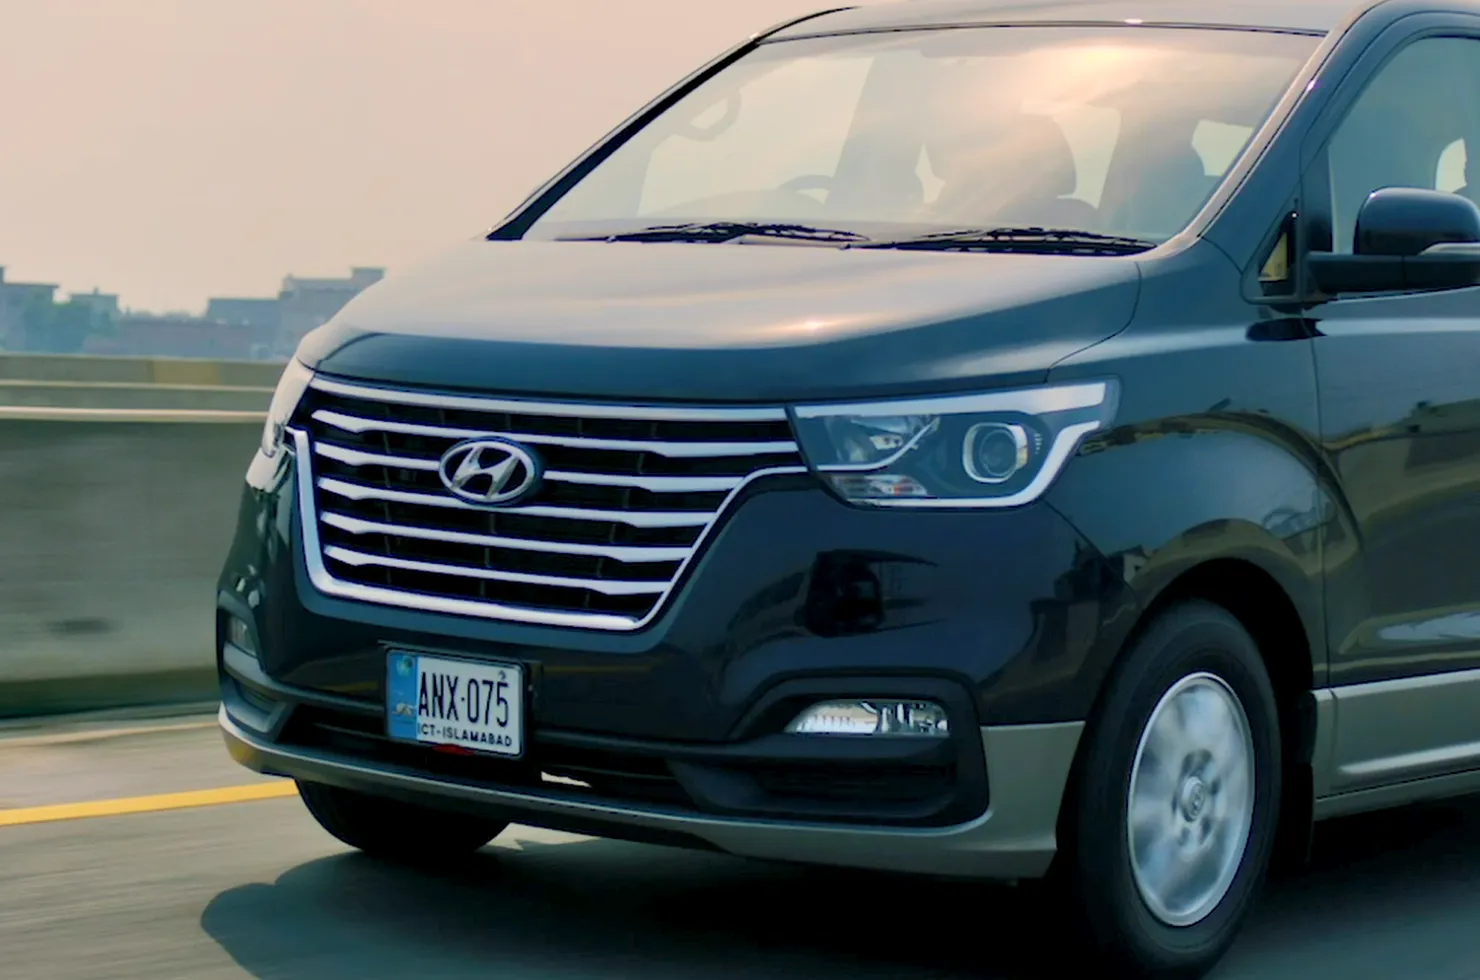 Live The Journey with Hyundai Grand Starex